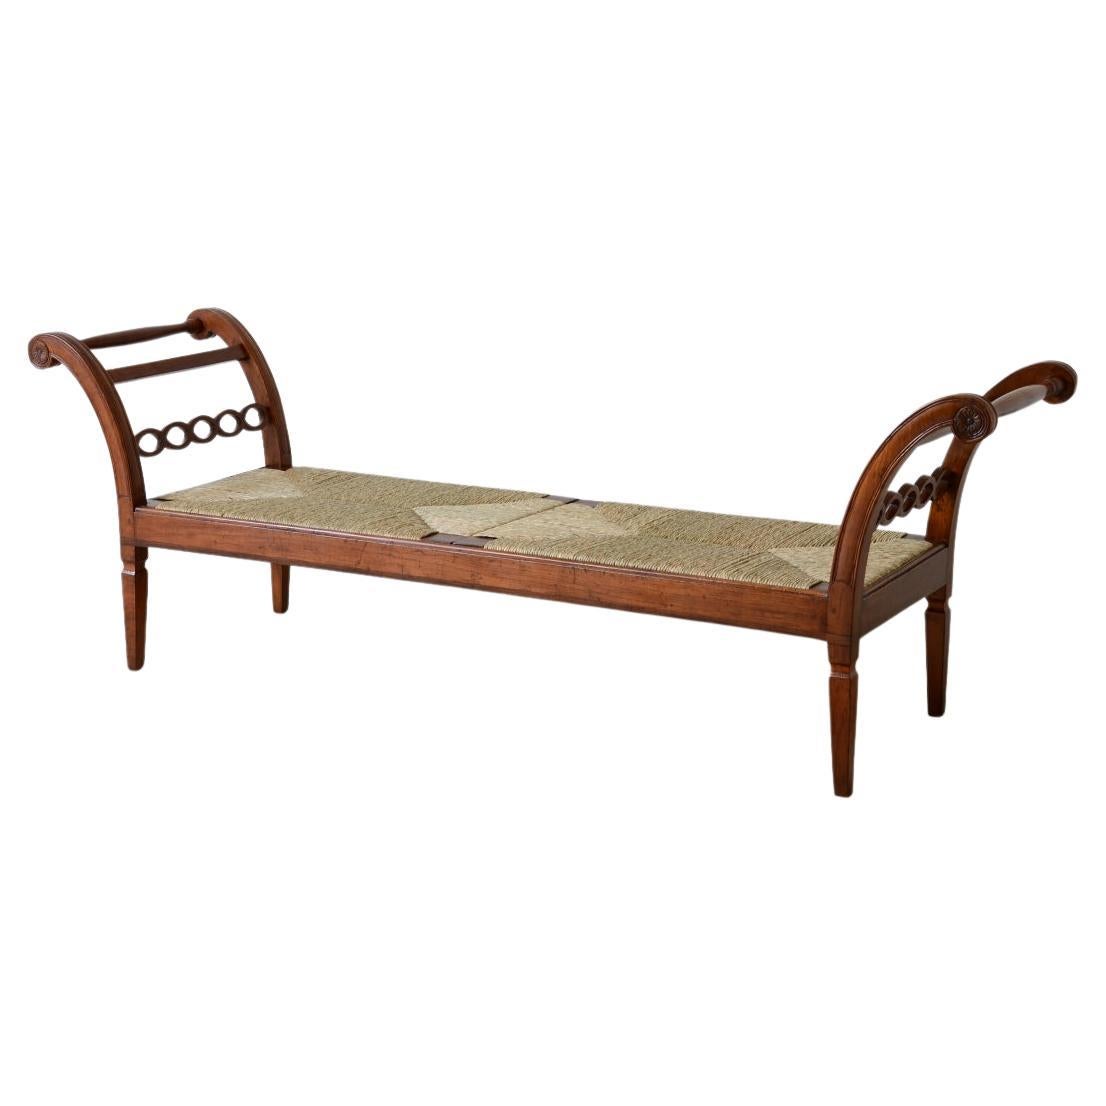 Large cherry wood bench with beautiful chain decoration For Sale